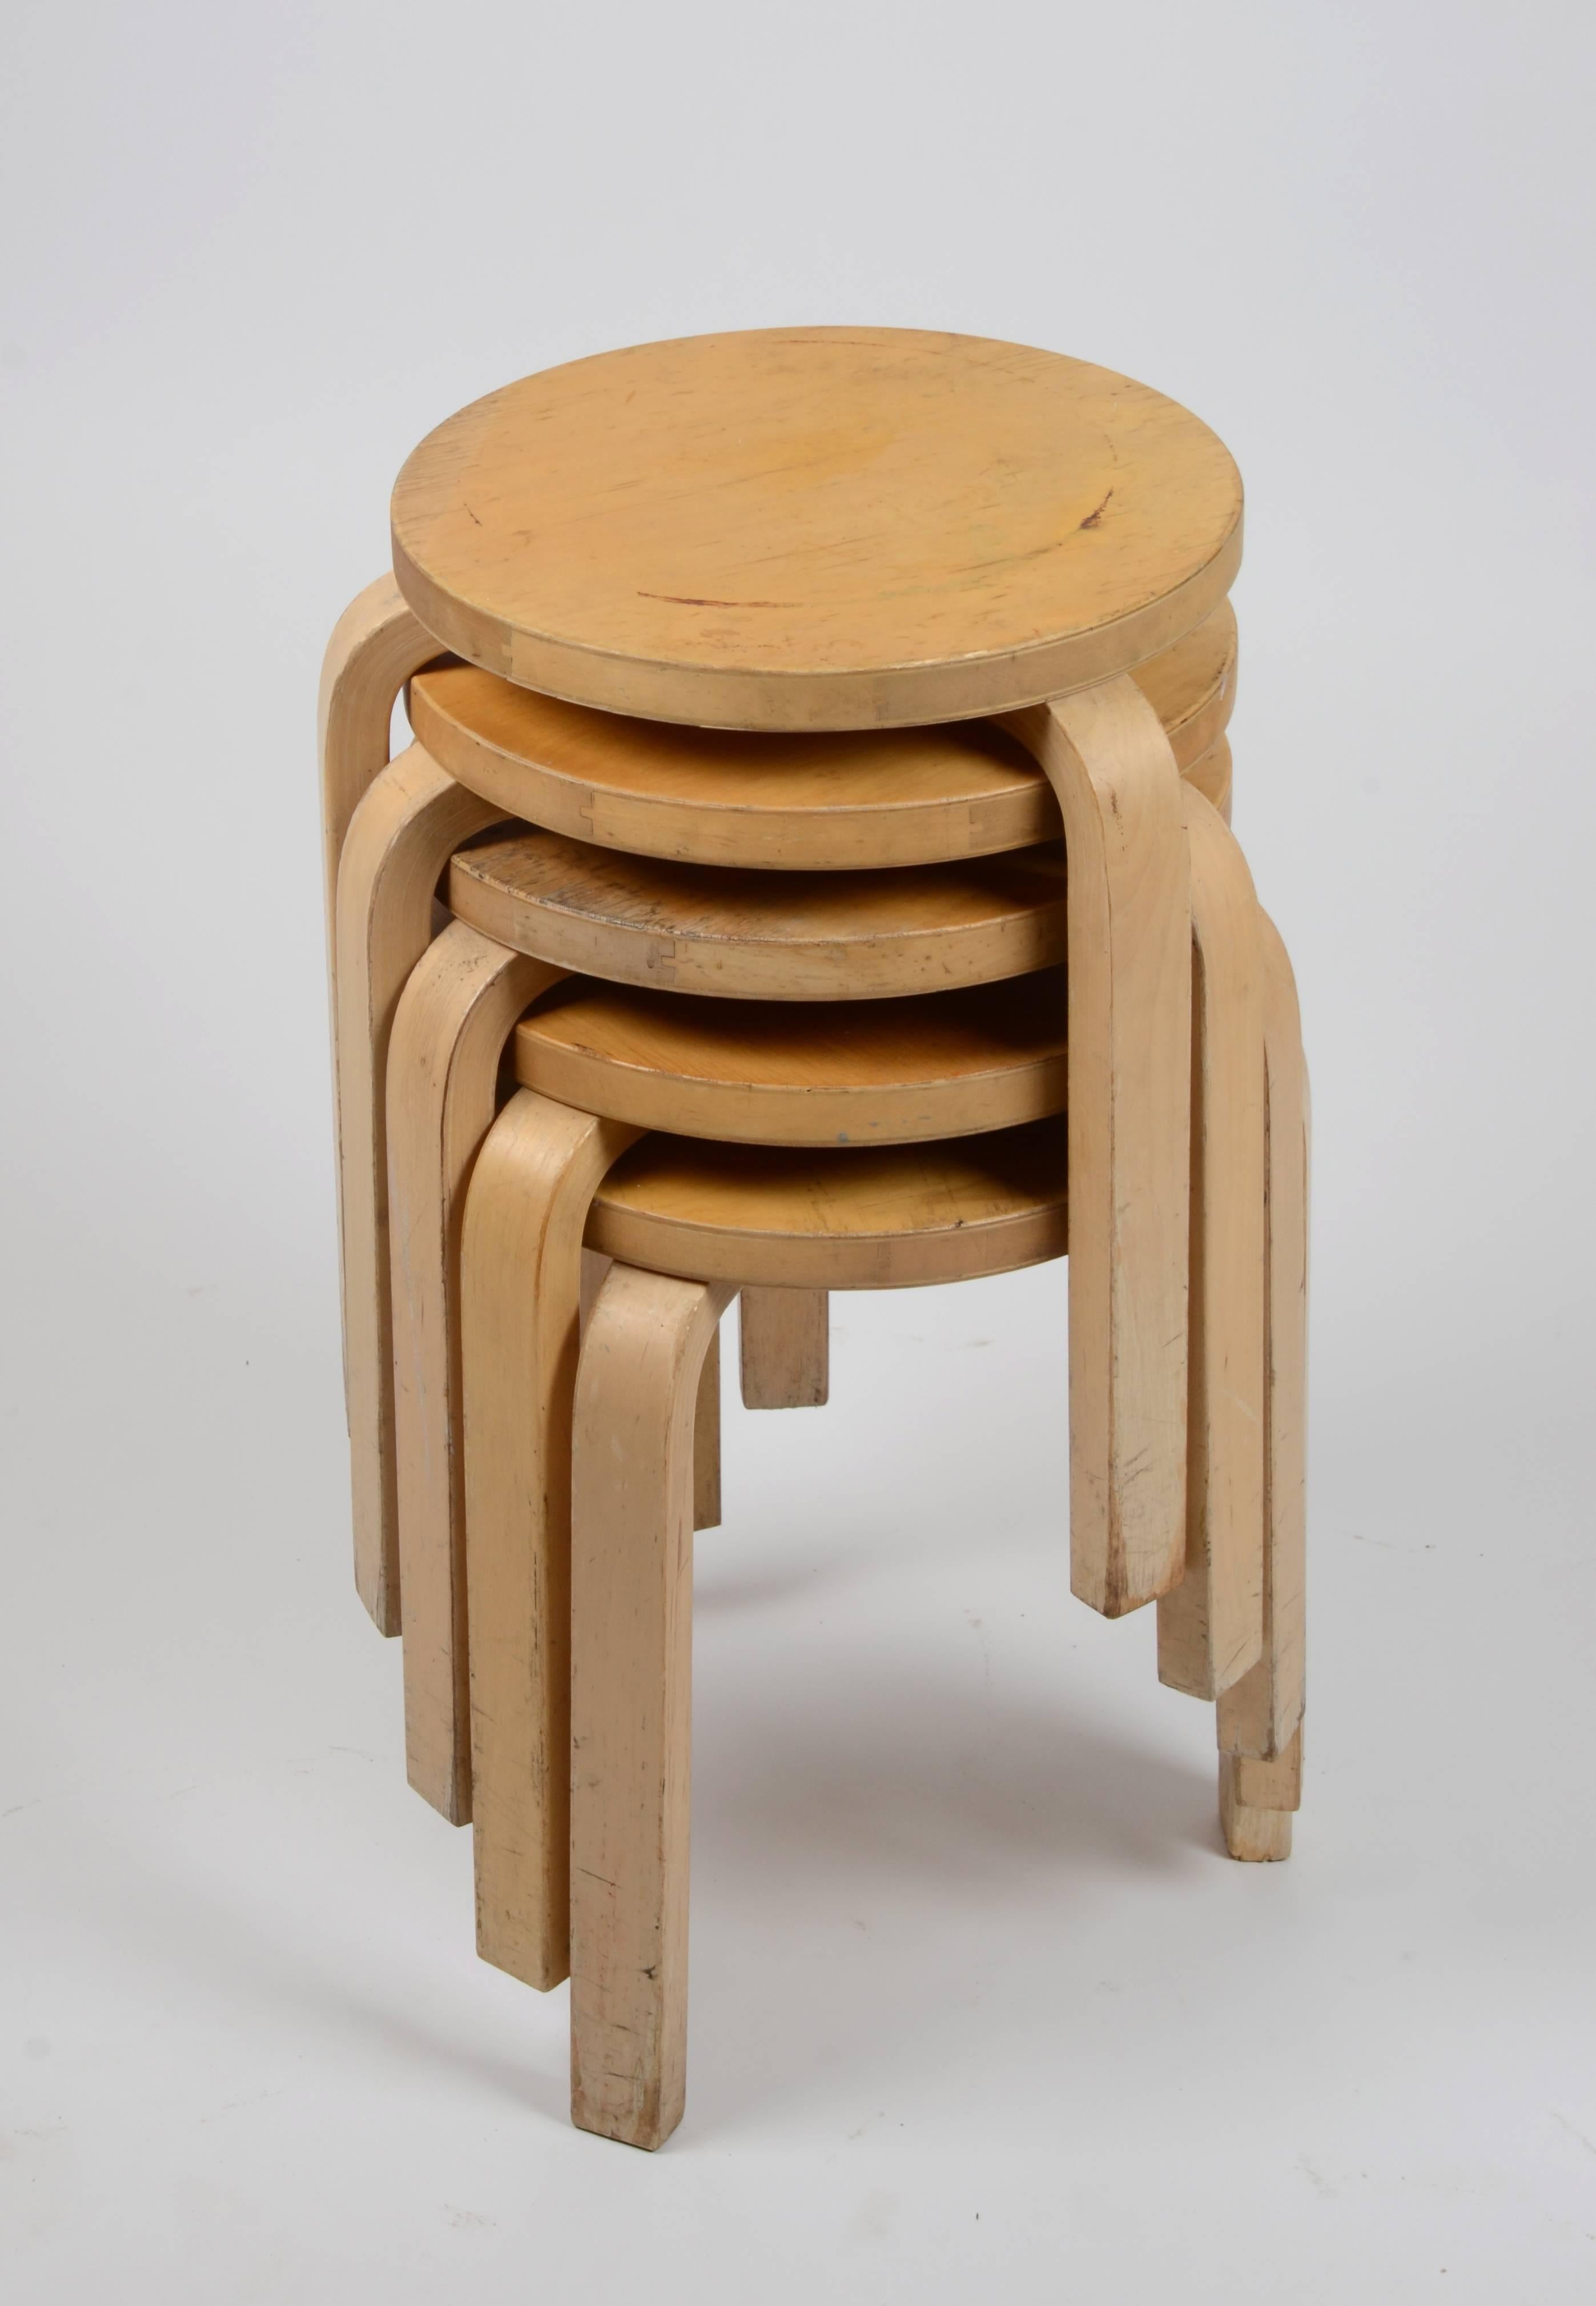 Five stacking chairs in beech, model 60 designed by Alvar Aalto in 1933.